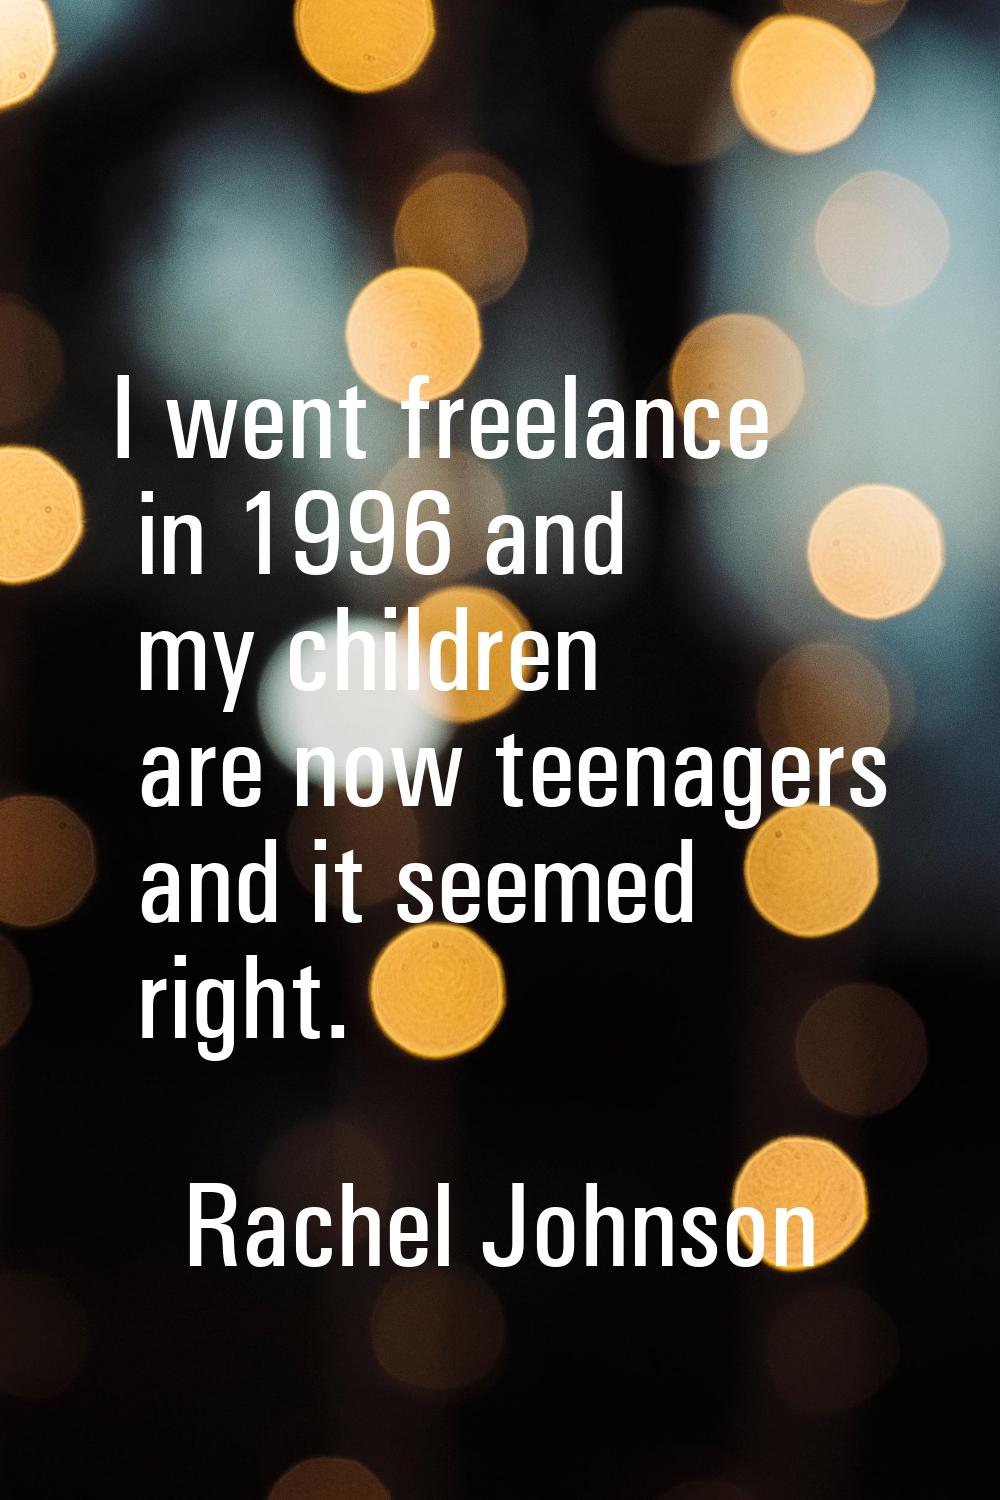 I went freelance in 1996 and my children are now teenagers and it seemed right.